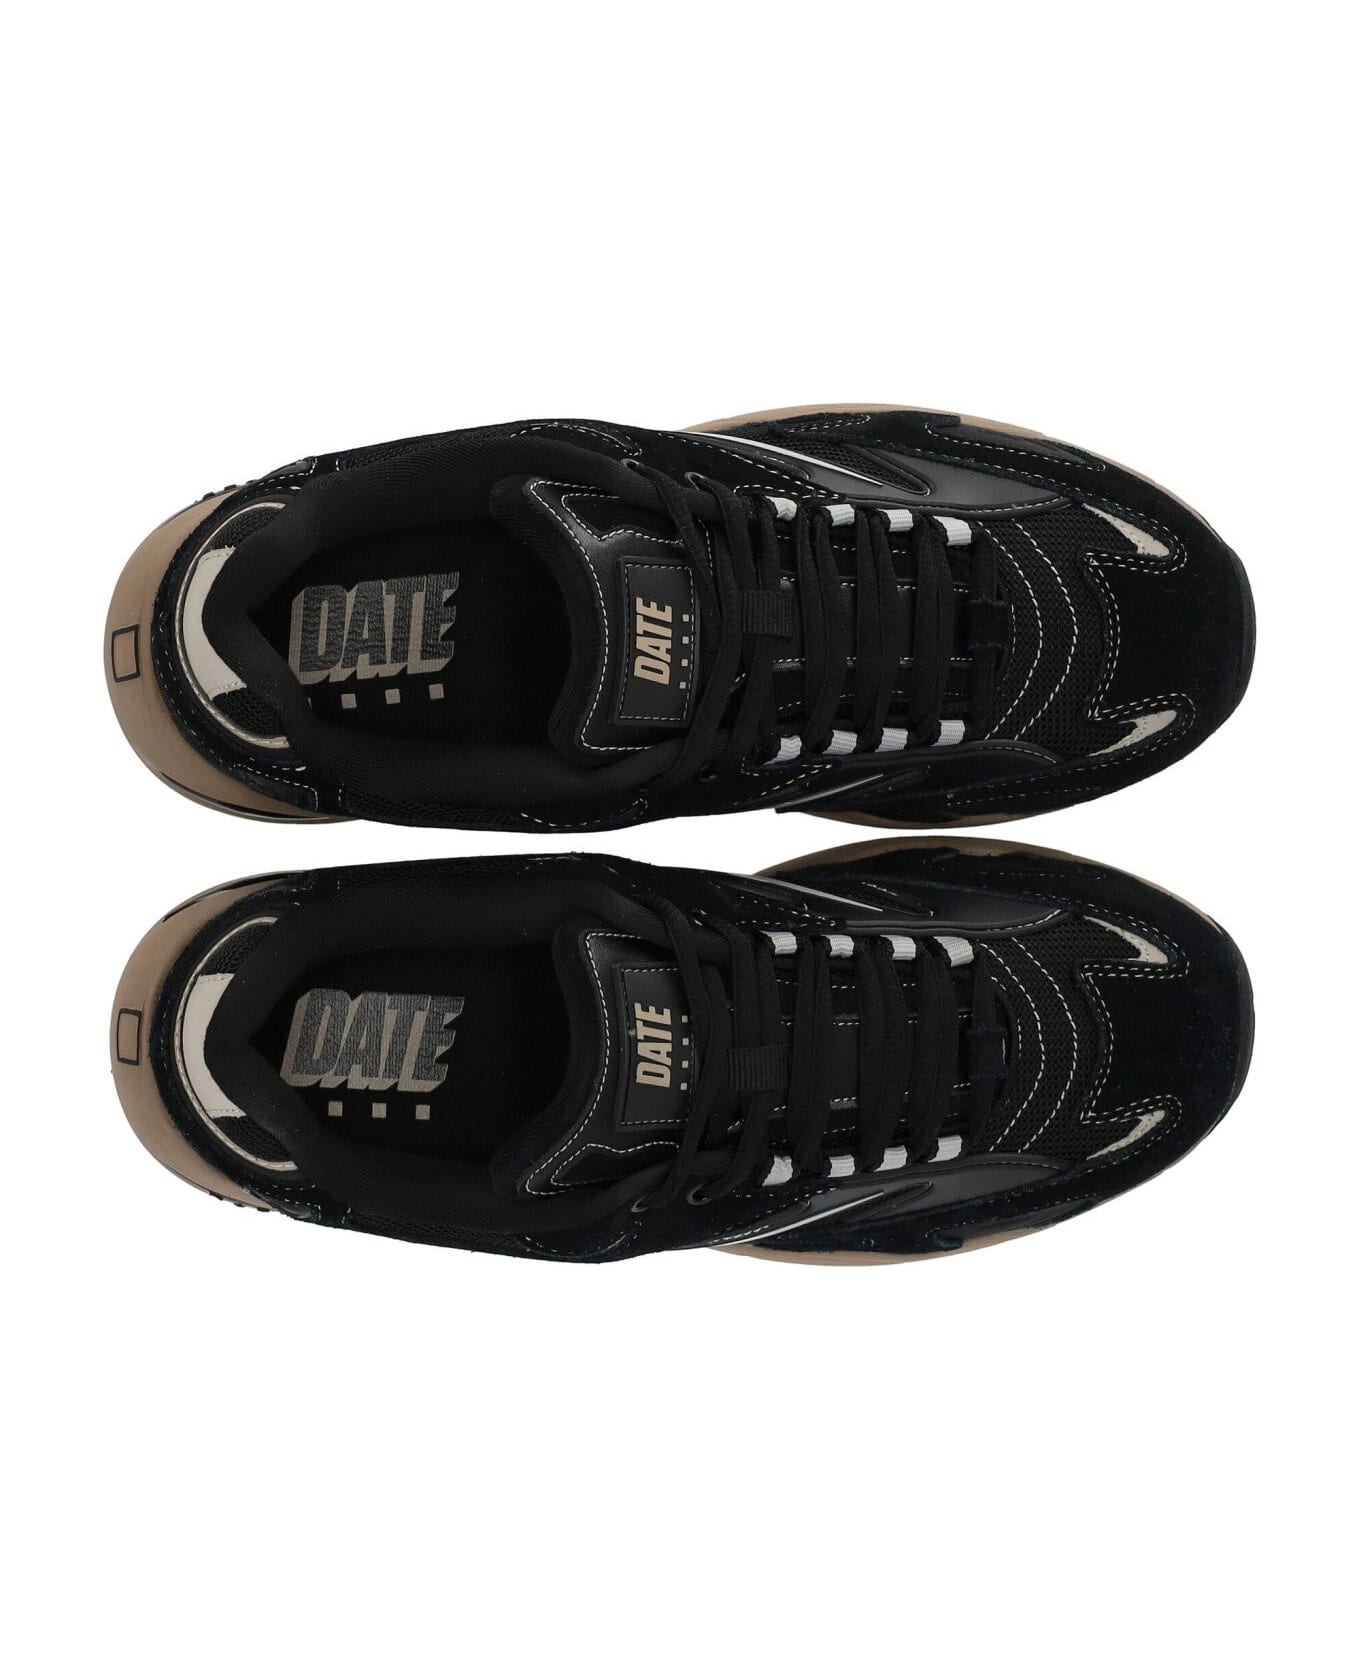 D.A.T.E. Sn 23 Collection Sneakers In Black Suede And Fabric - Nero